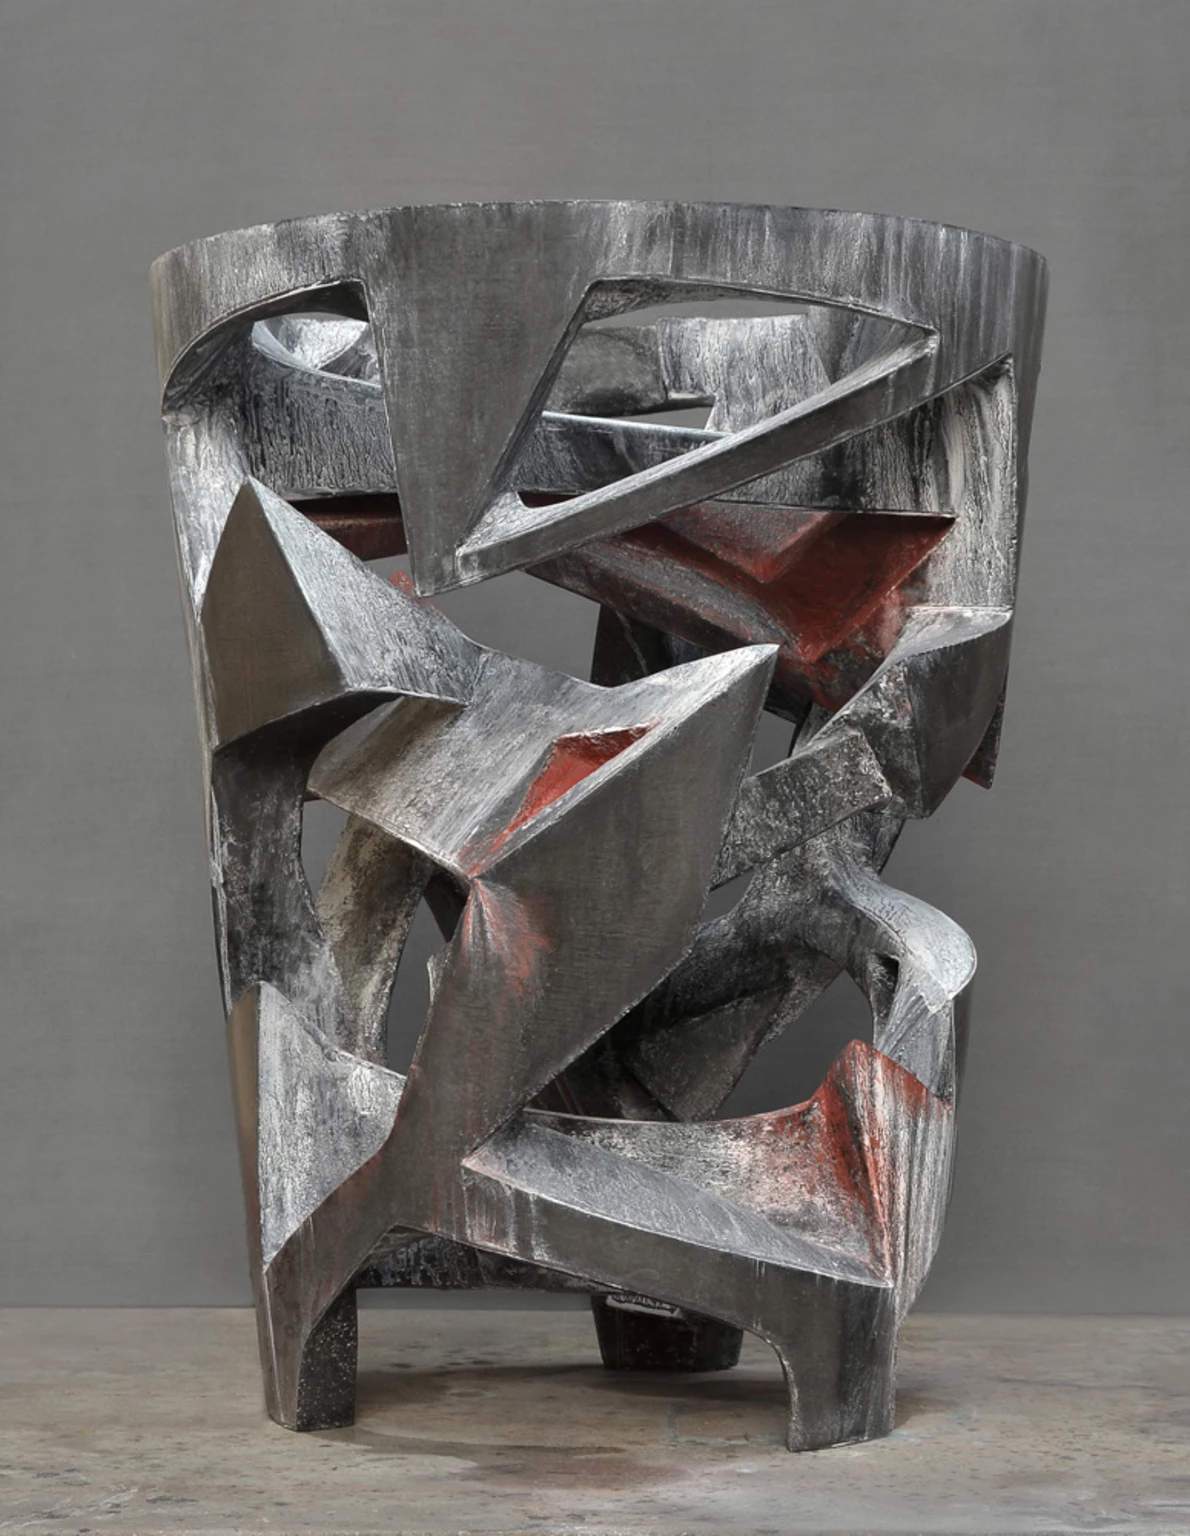 Transfixion, 2012 - colored and painted concrete, 68 x 54 x 54 cm